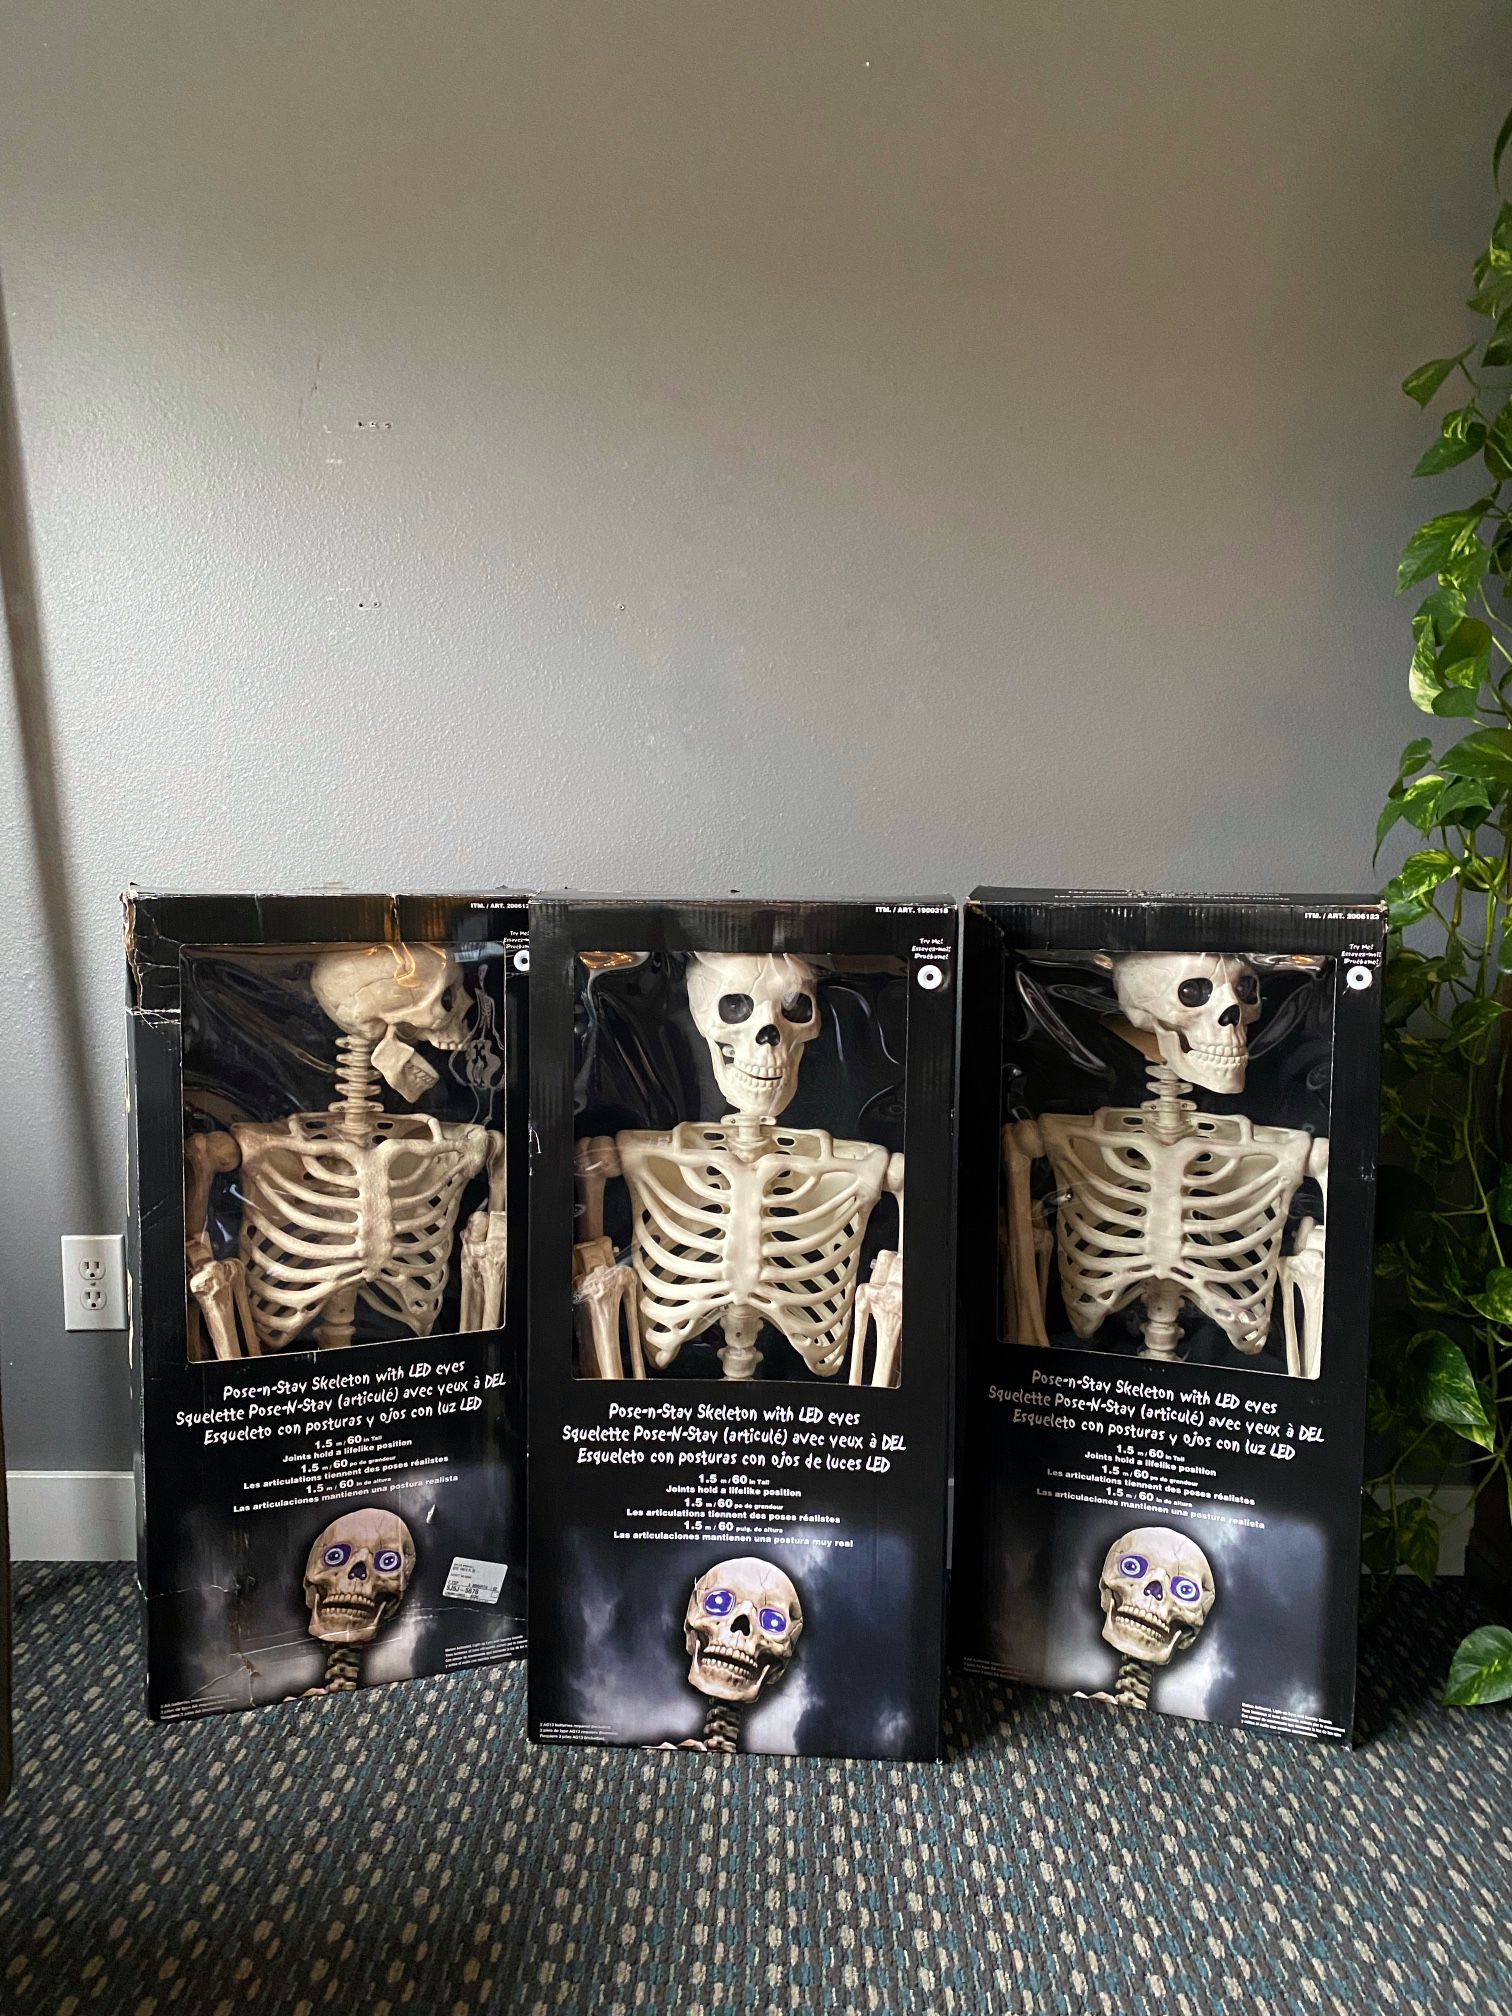 3 Pose And Stay 5ft Tall Skeletons w/ LED Eyes -Pending PU